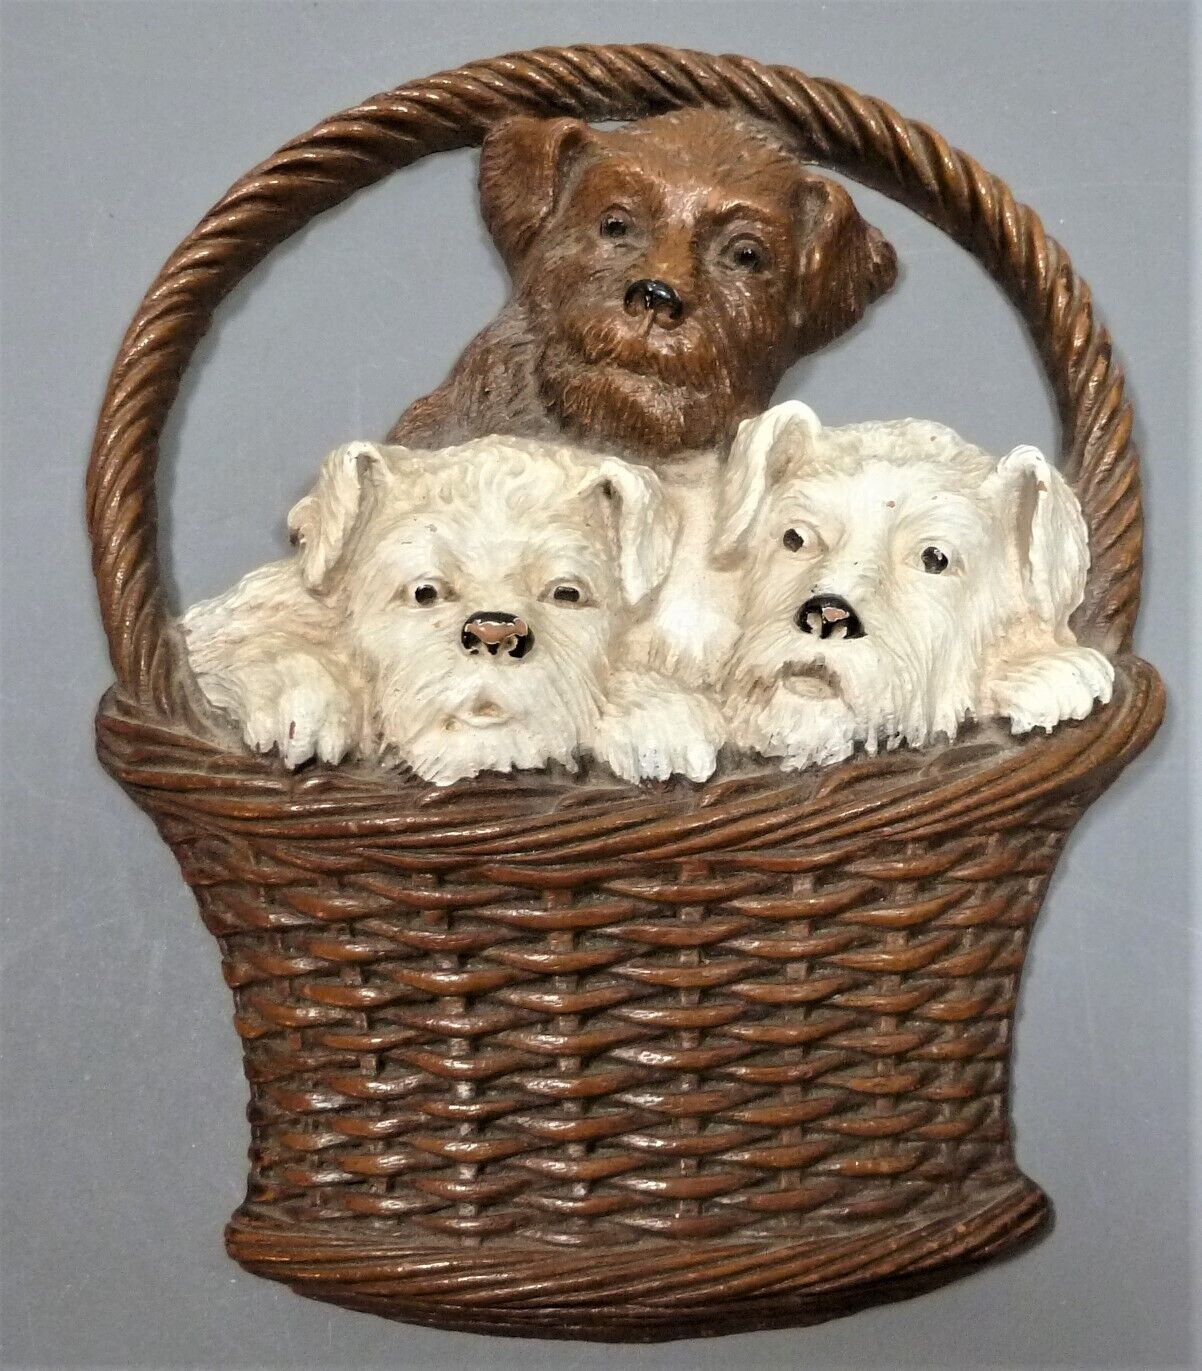 Vintage Wall Hanging Basket of Puppies by Ornawood, 1940s Label Victory Shop